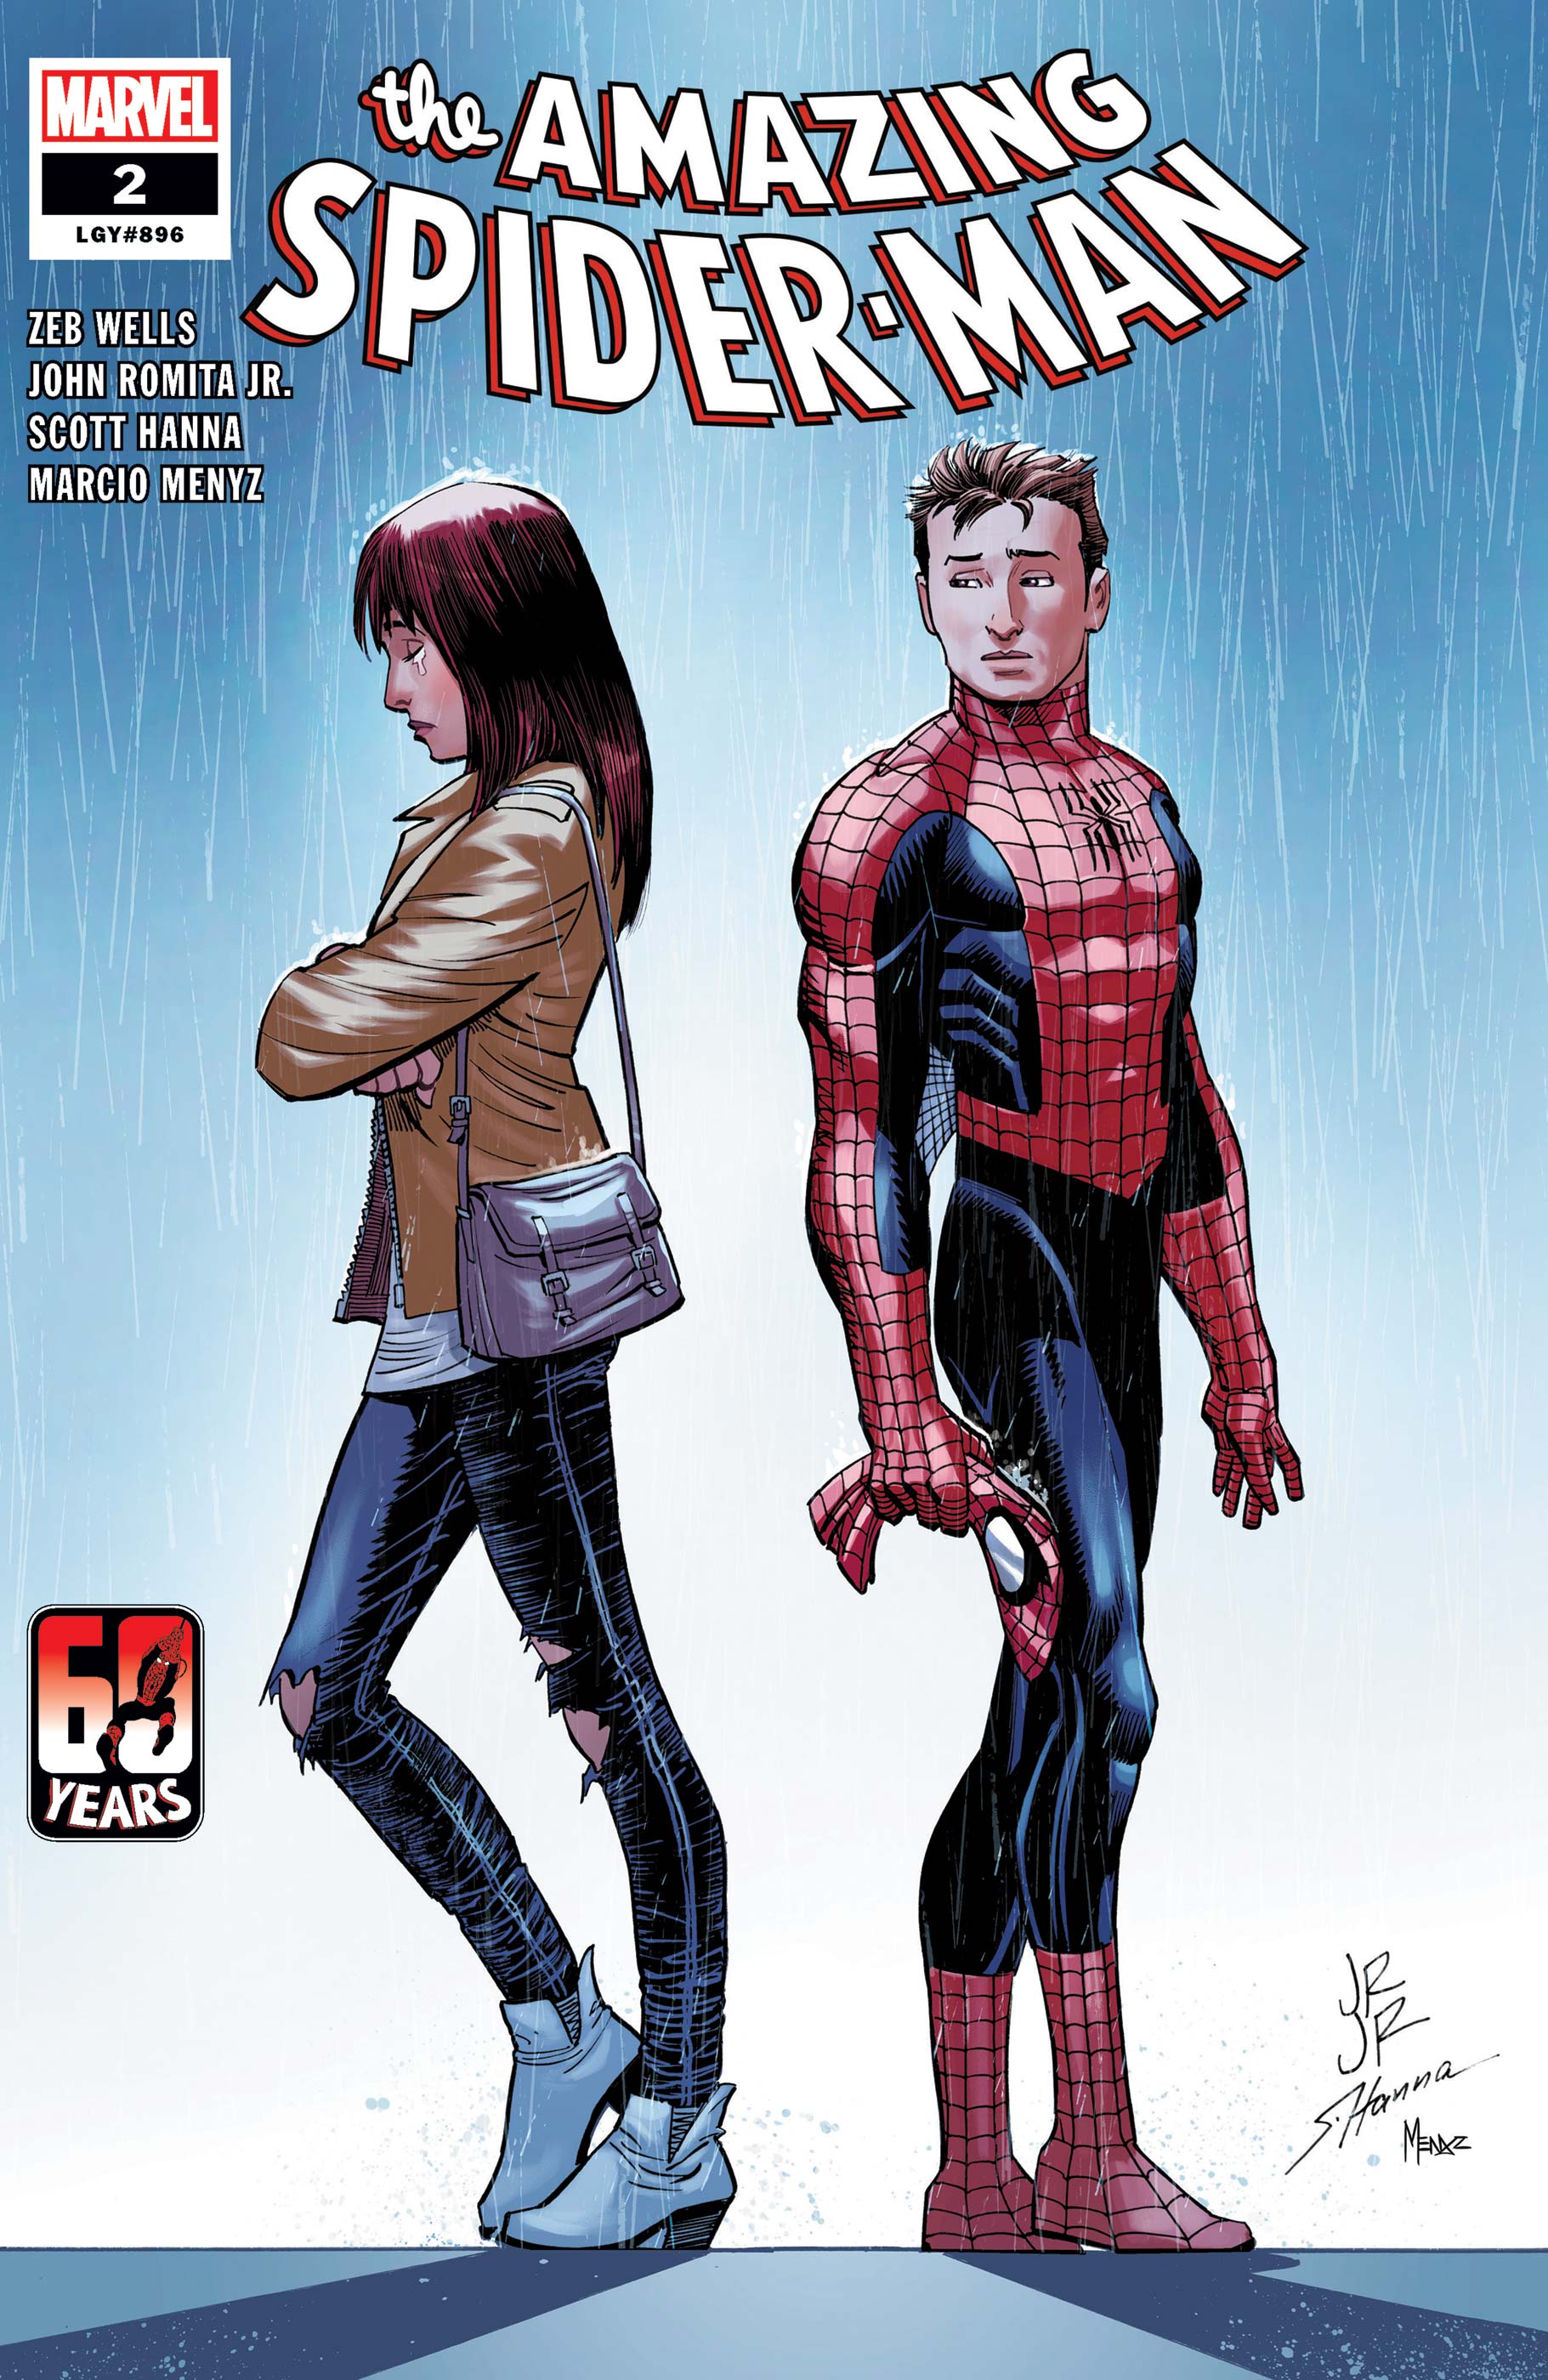 The Amazing Spider-Man (2022) #2 | Comic Issues | Marvel